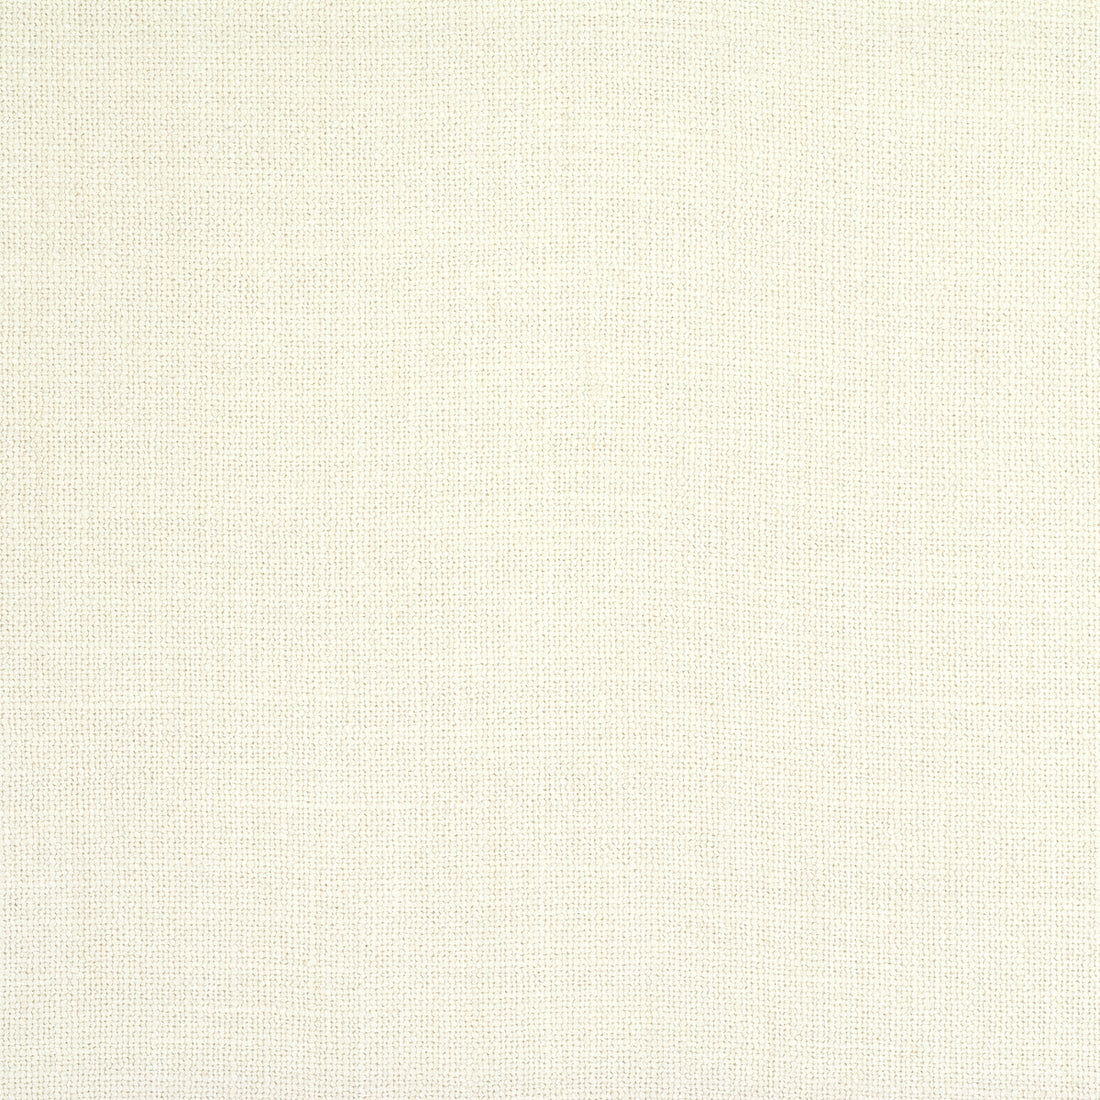 Elodie Texture fabric in ivory color - pattern 8017143.1.0 - by Brunschwig &amp; Fils